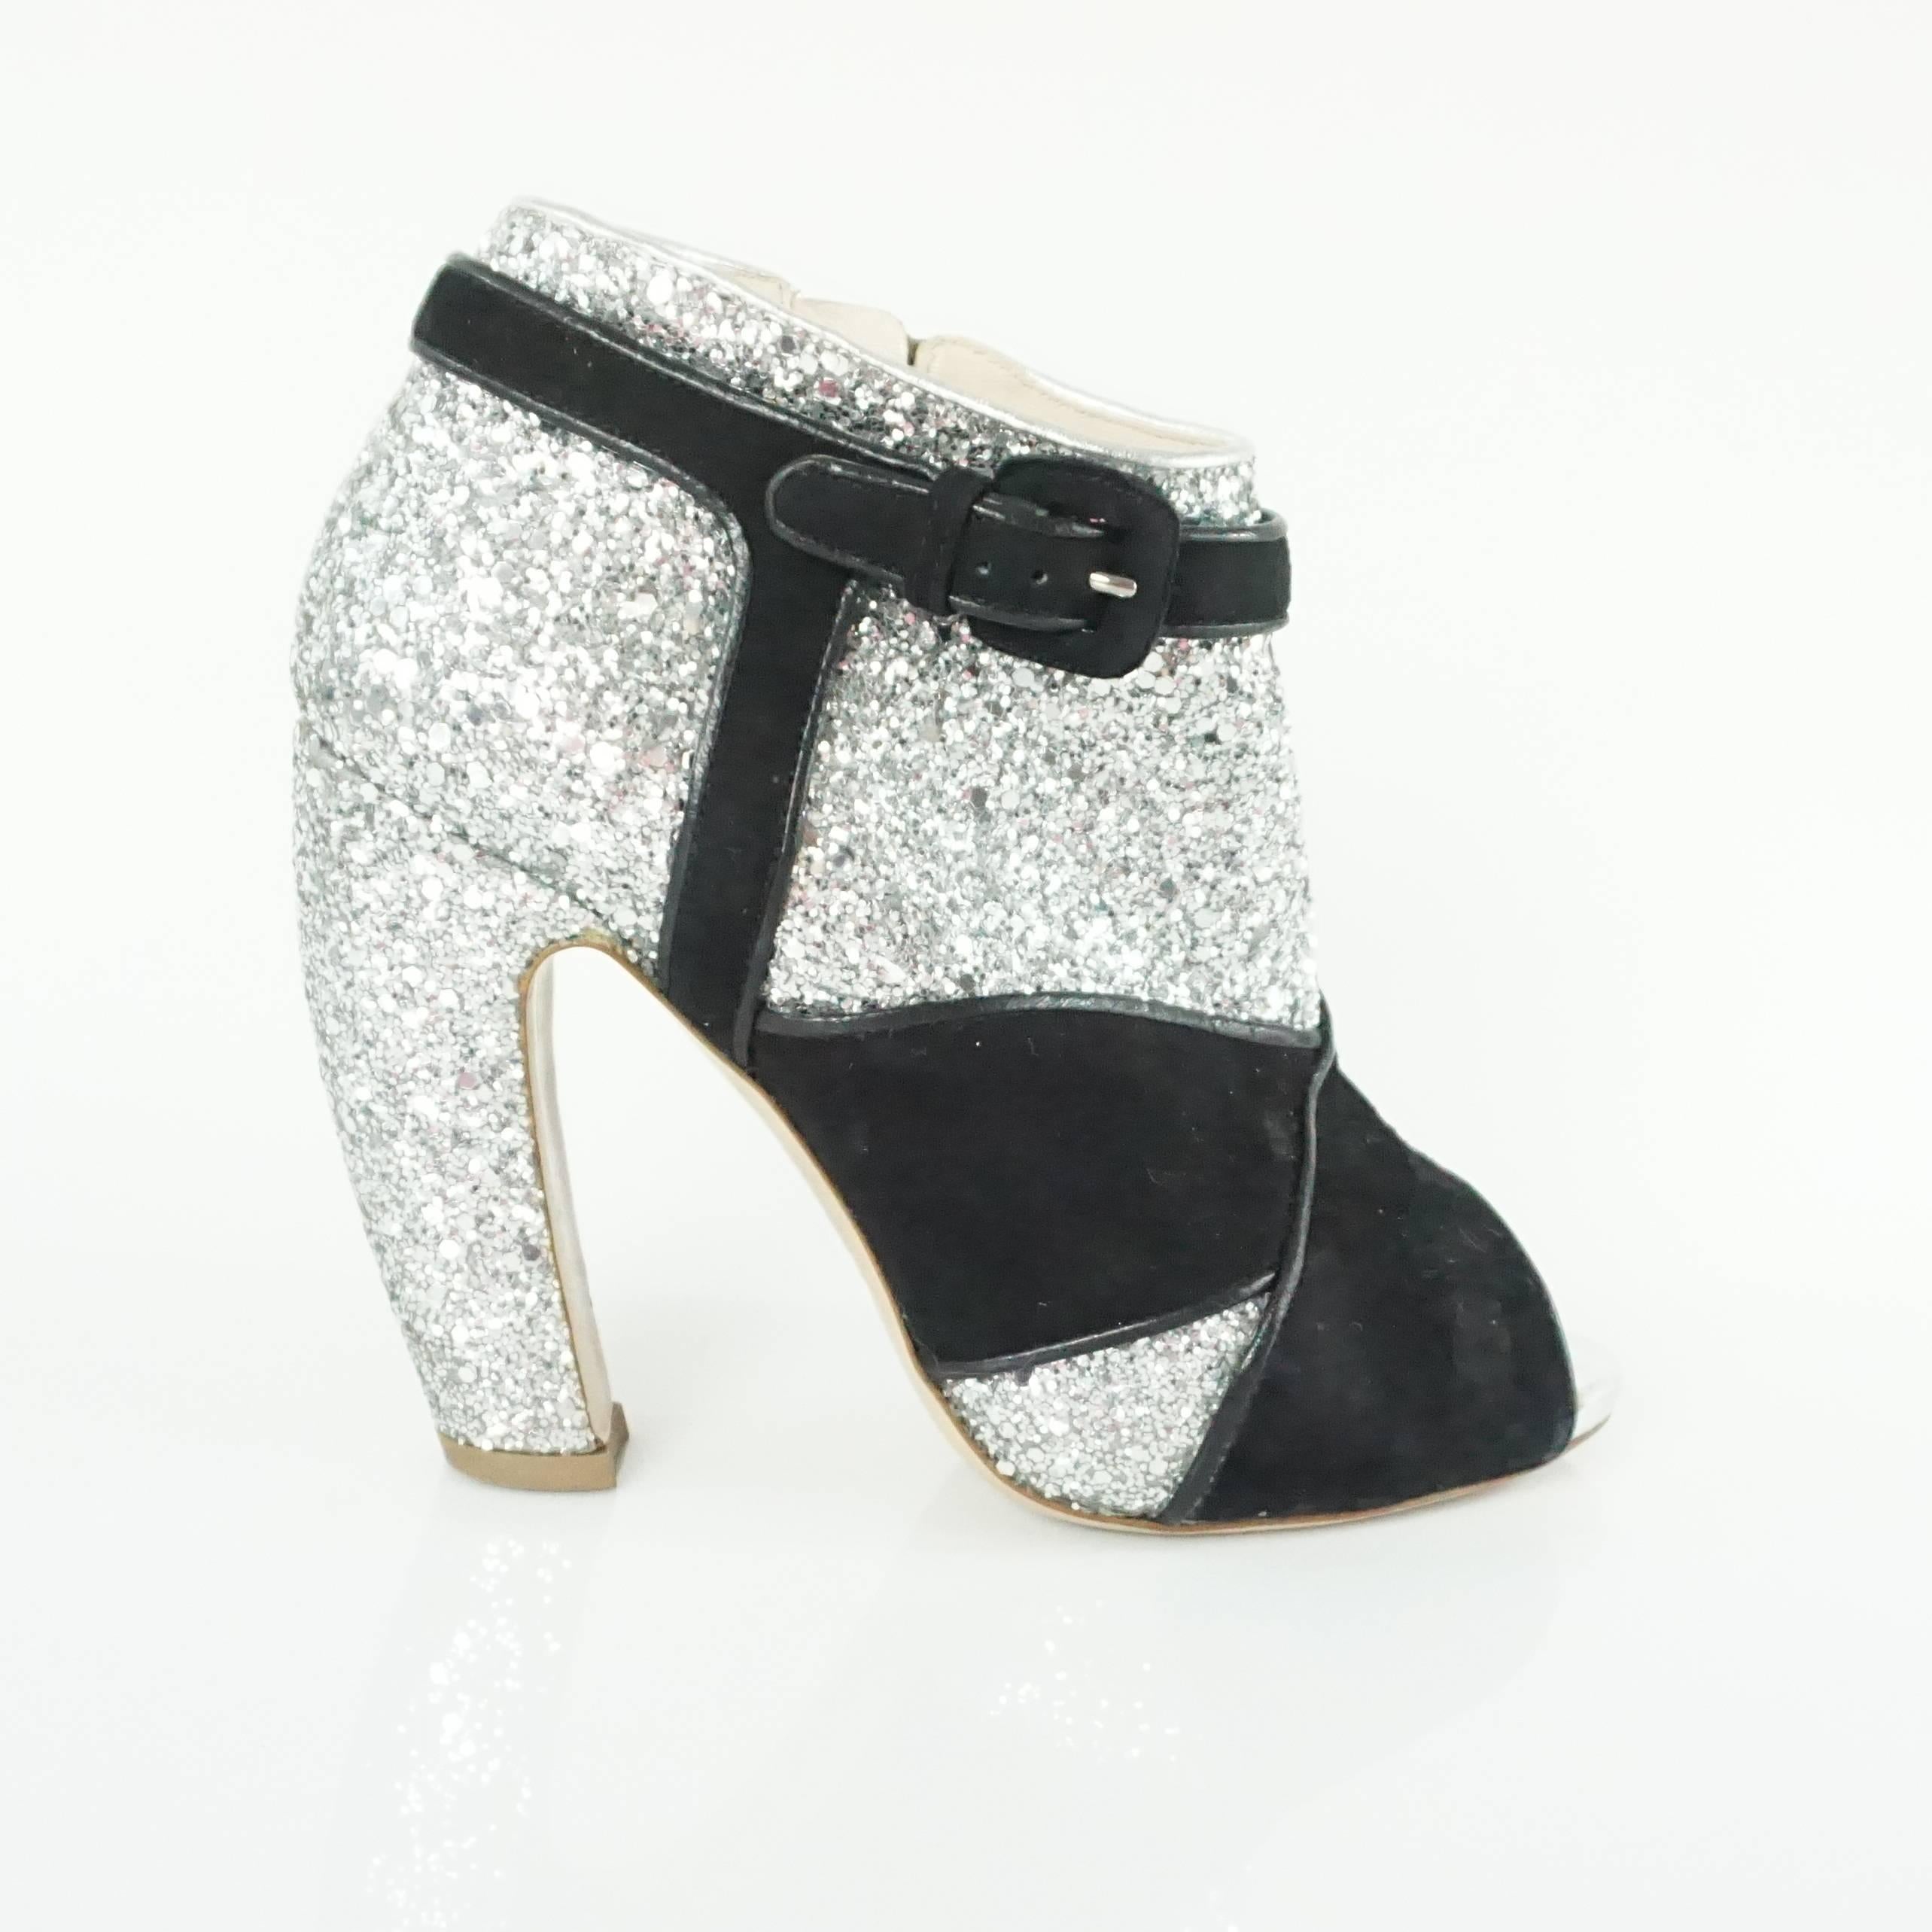 These Miu Miu booties are a truly spectacular find. They feature a silver glitter body with black suede overlay in the shape of a vintage heel. The booties also have a back zip and peep toes. They are in good condition with general wear to the body